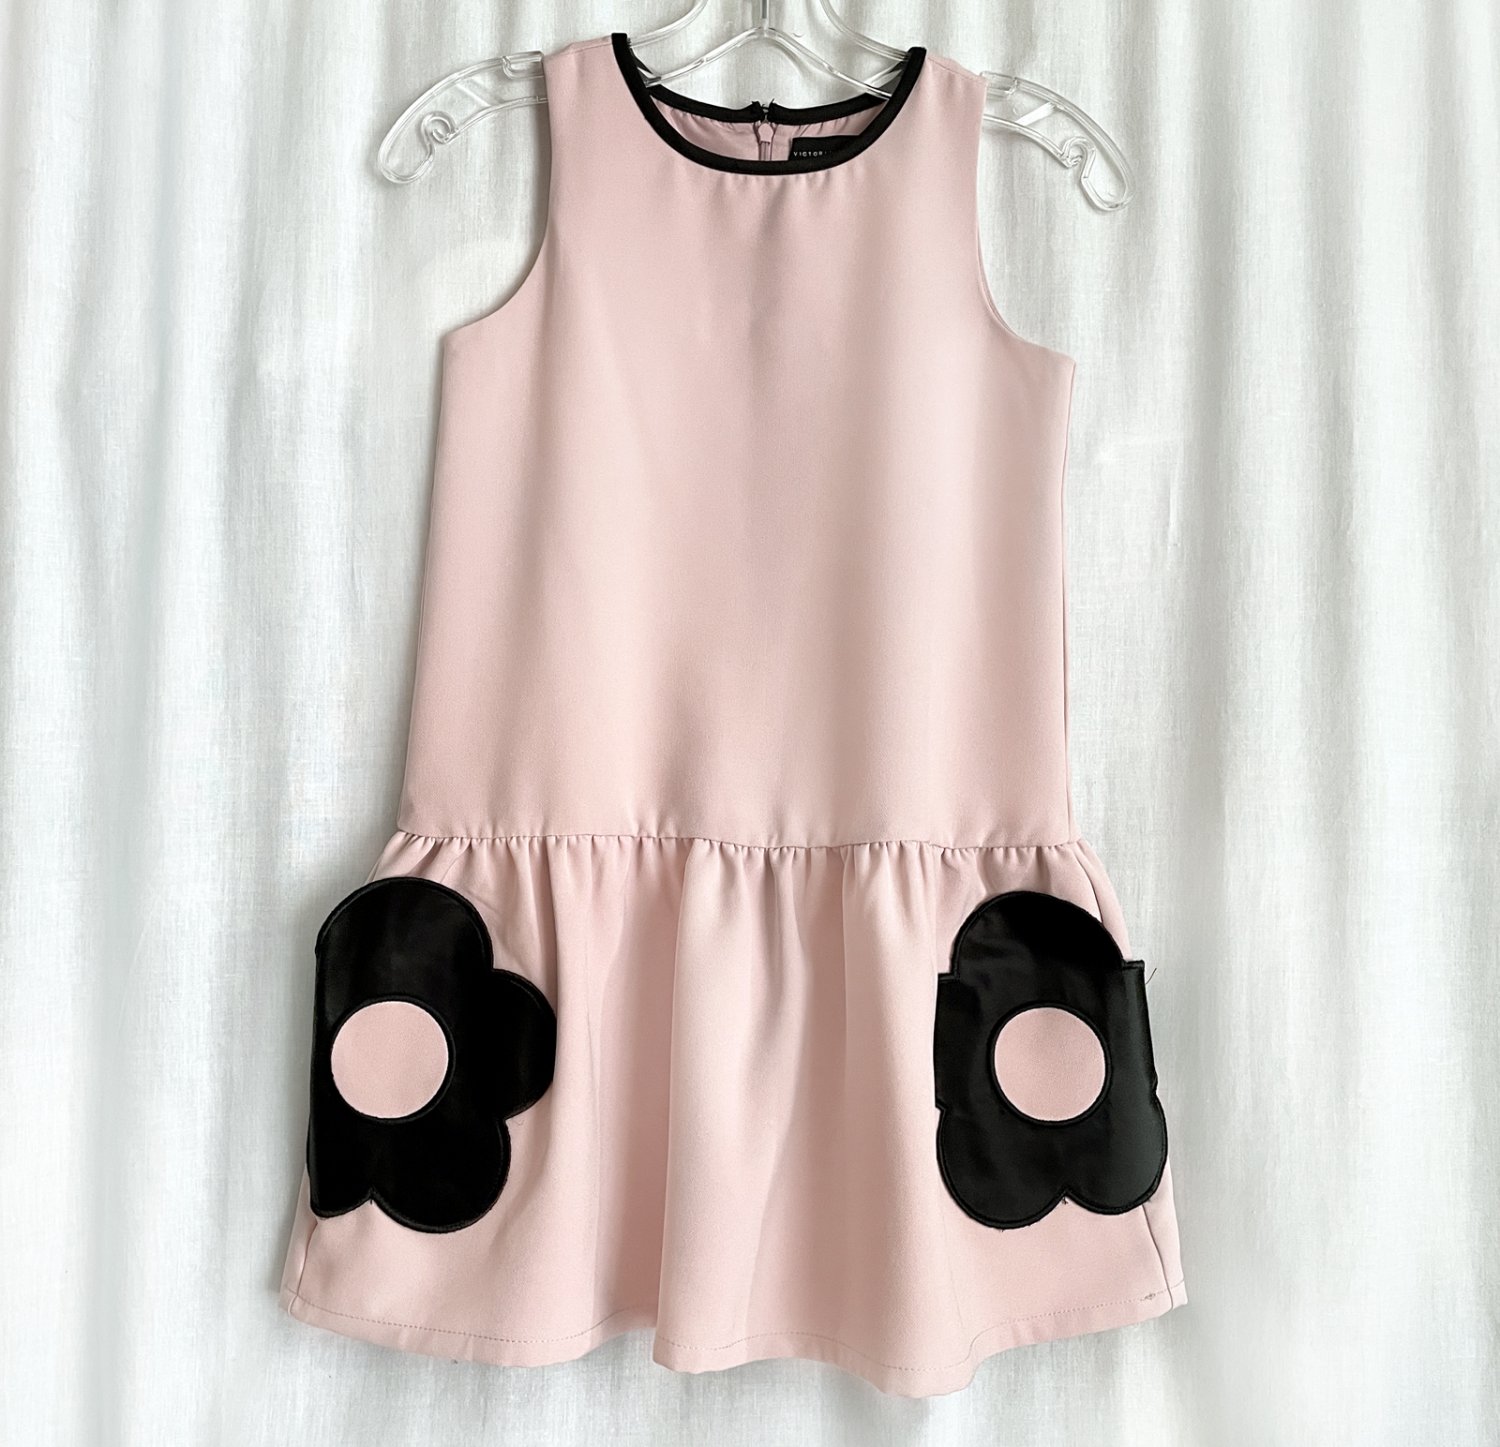 Mini dres for girl or young teenager, light pink with black accents. Size M